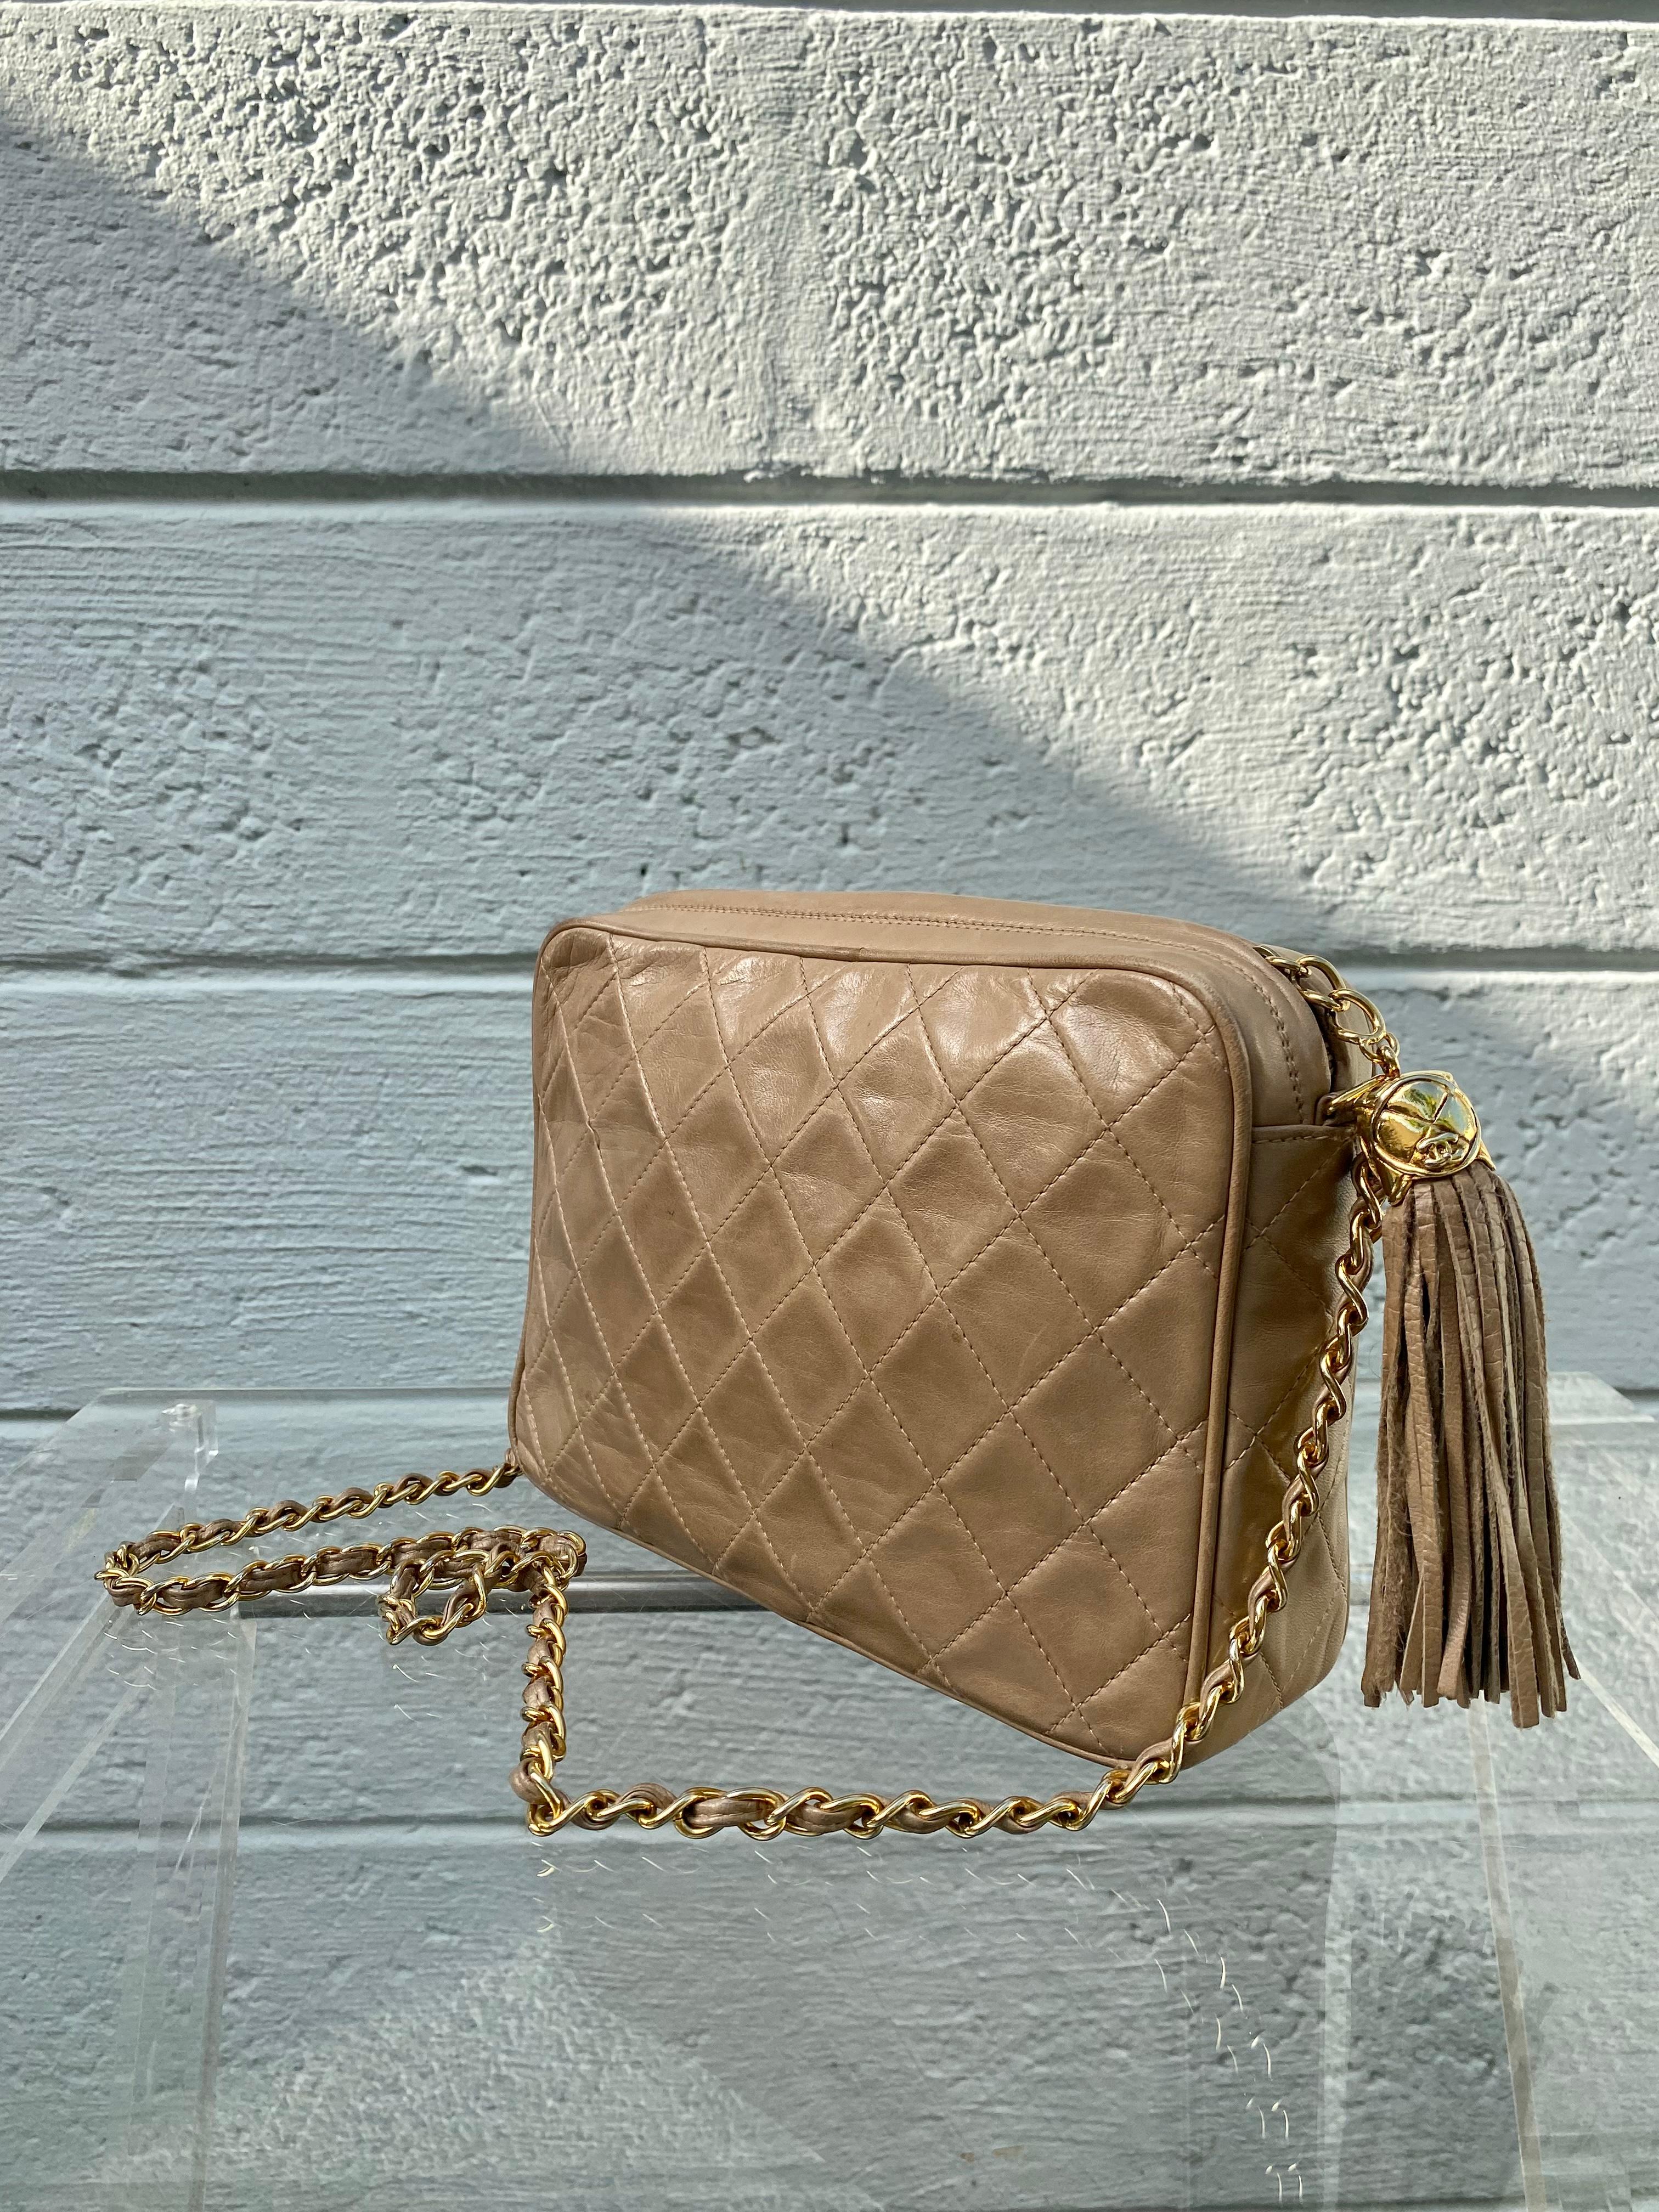 Chanel Vintage Beige Quilted Lambskin Camera Crossbody Bag In Good Condition For Sale In Fort Lauderdale, FL